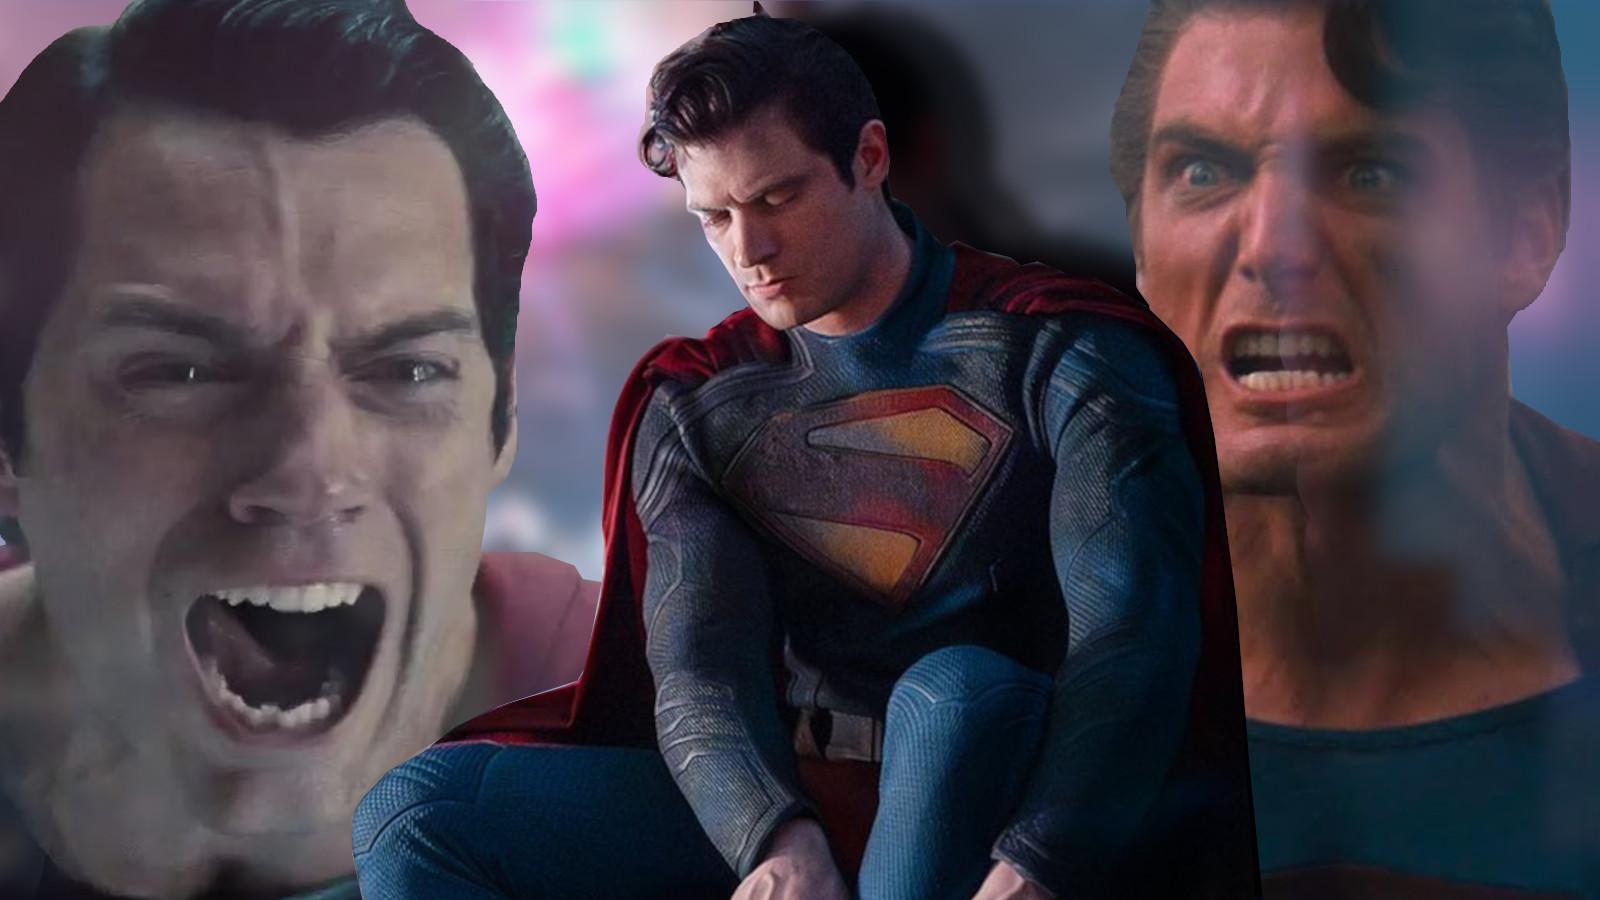 Henry Cavill's Superman and Christopher Reeves Superman scream while David Corenswet's Superman gets dressed.